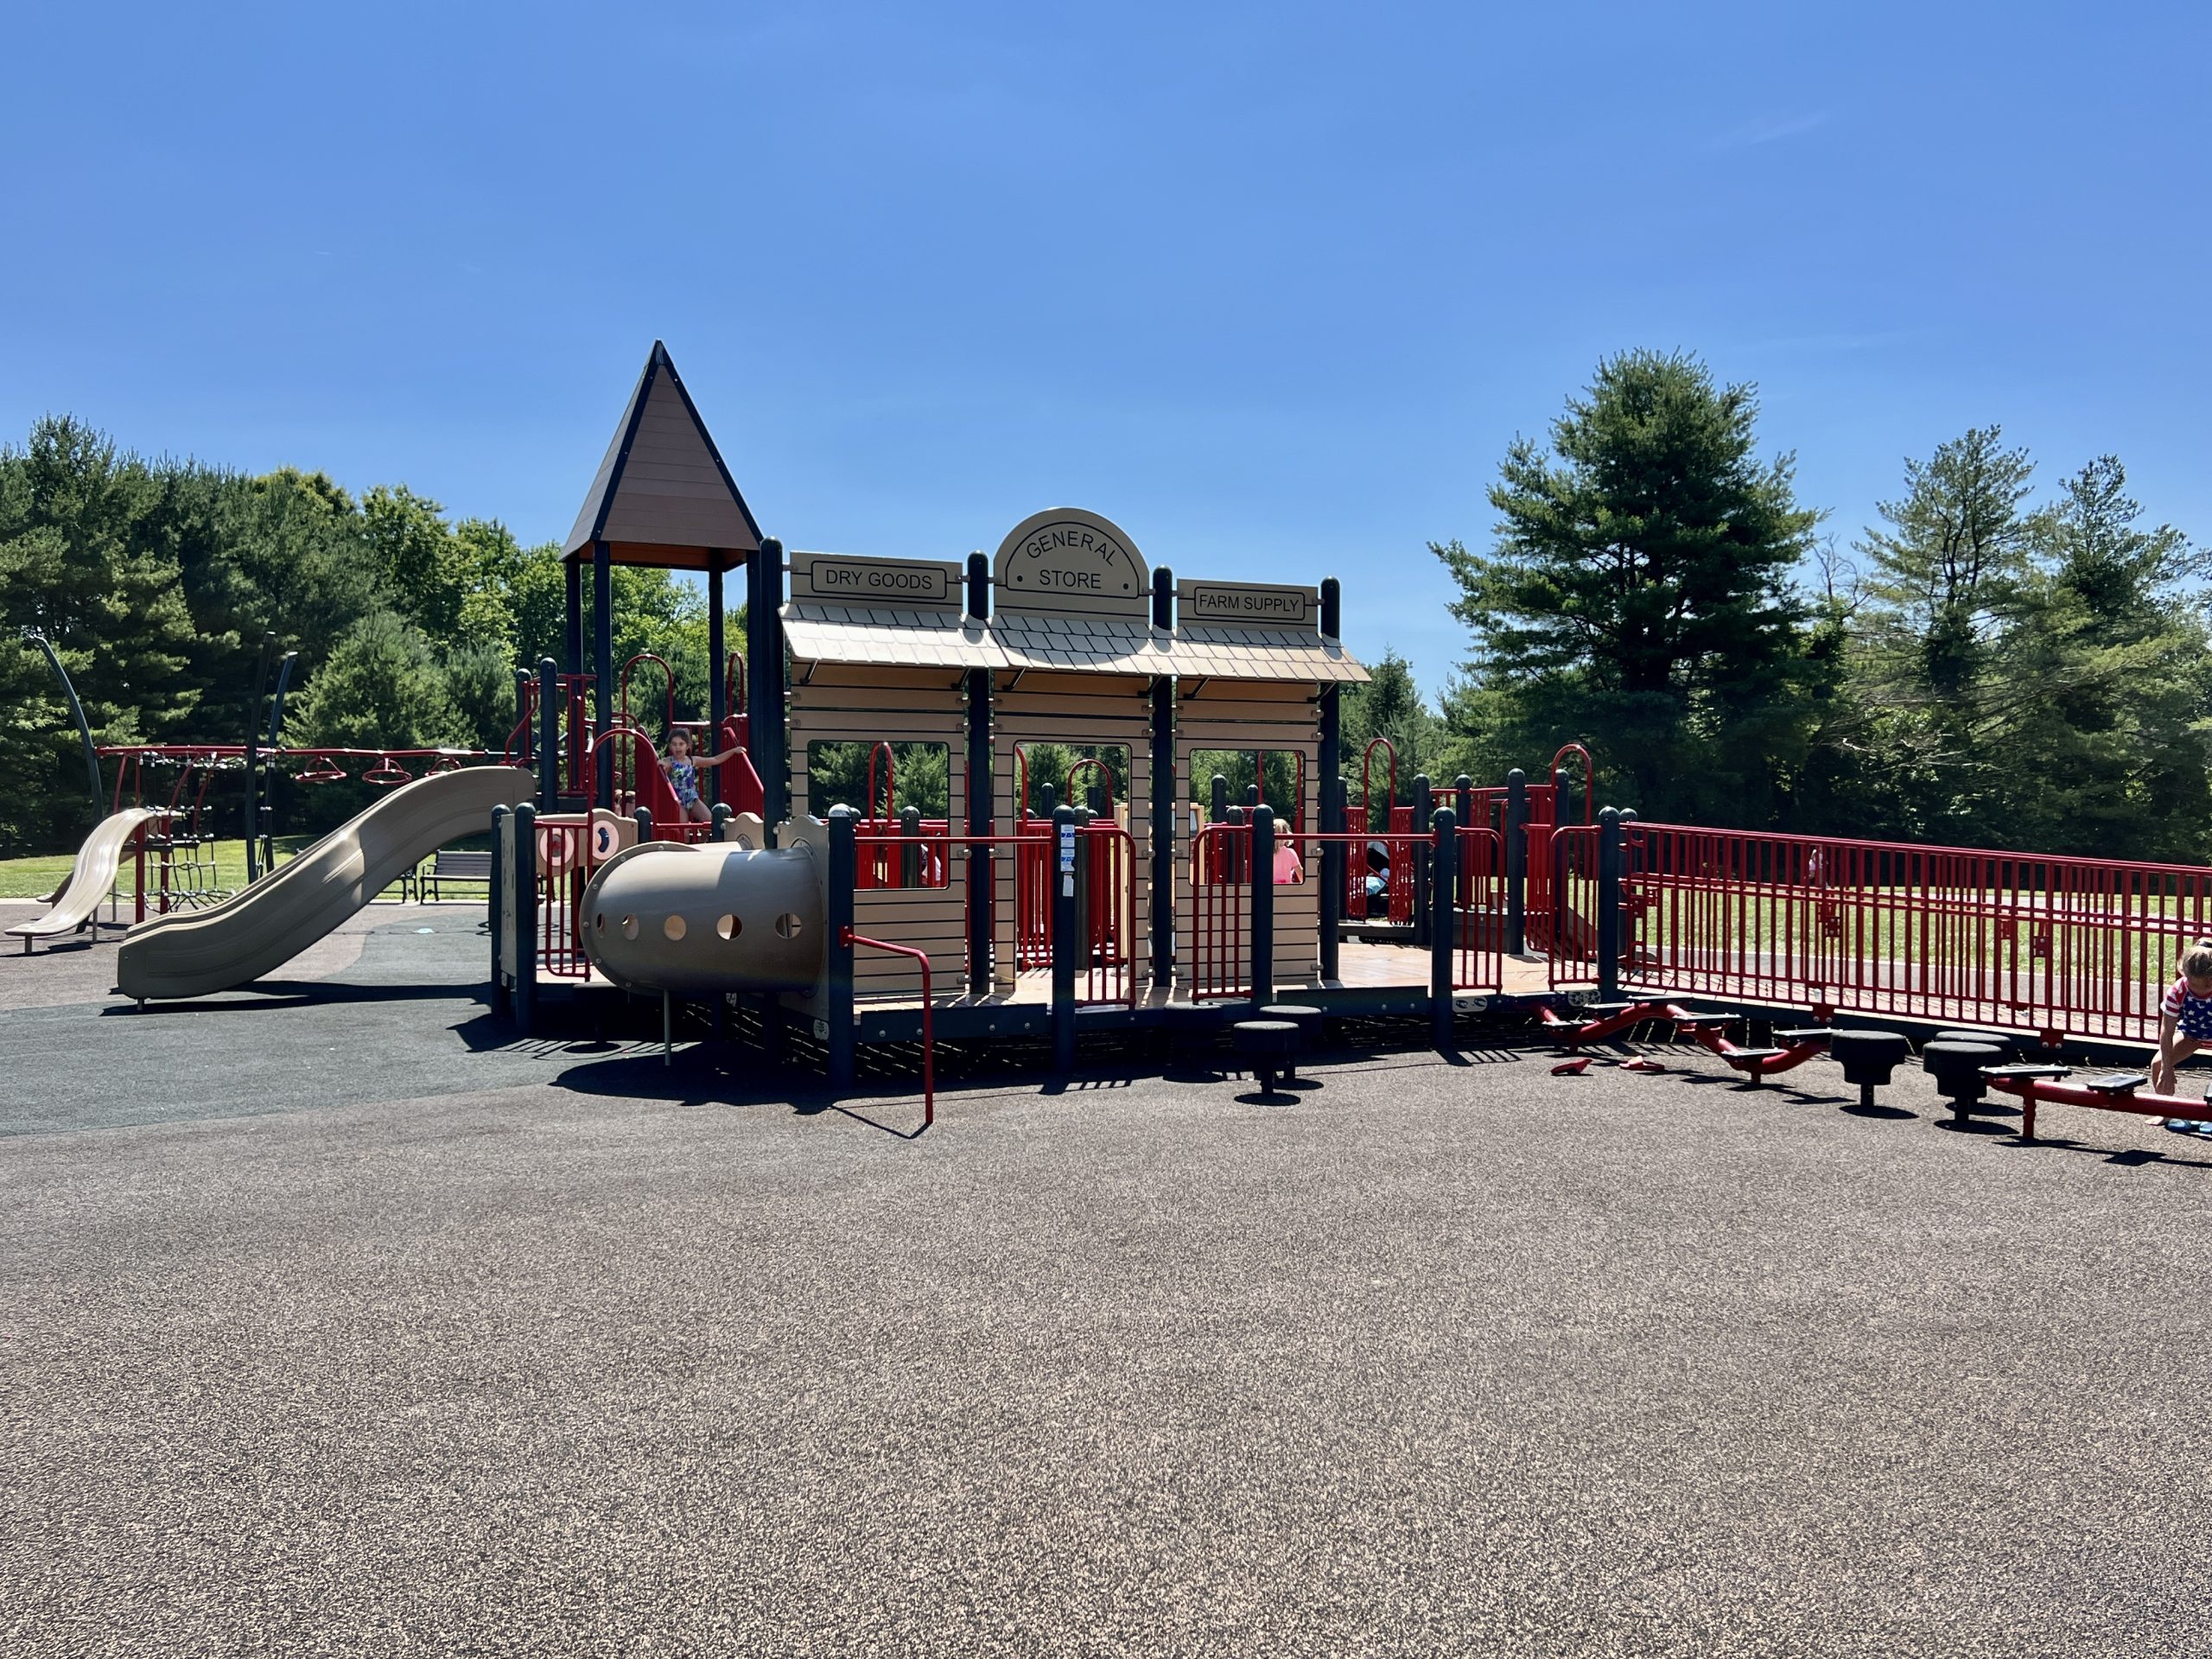 Ponderosa Farm Park Playground general store in Scotch Plains NJ horizontal image of front with ramp 1